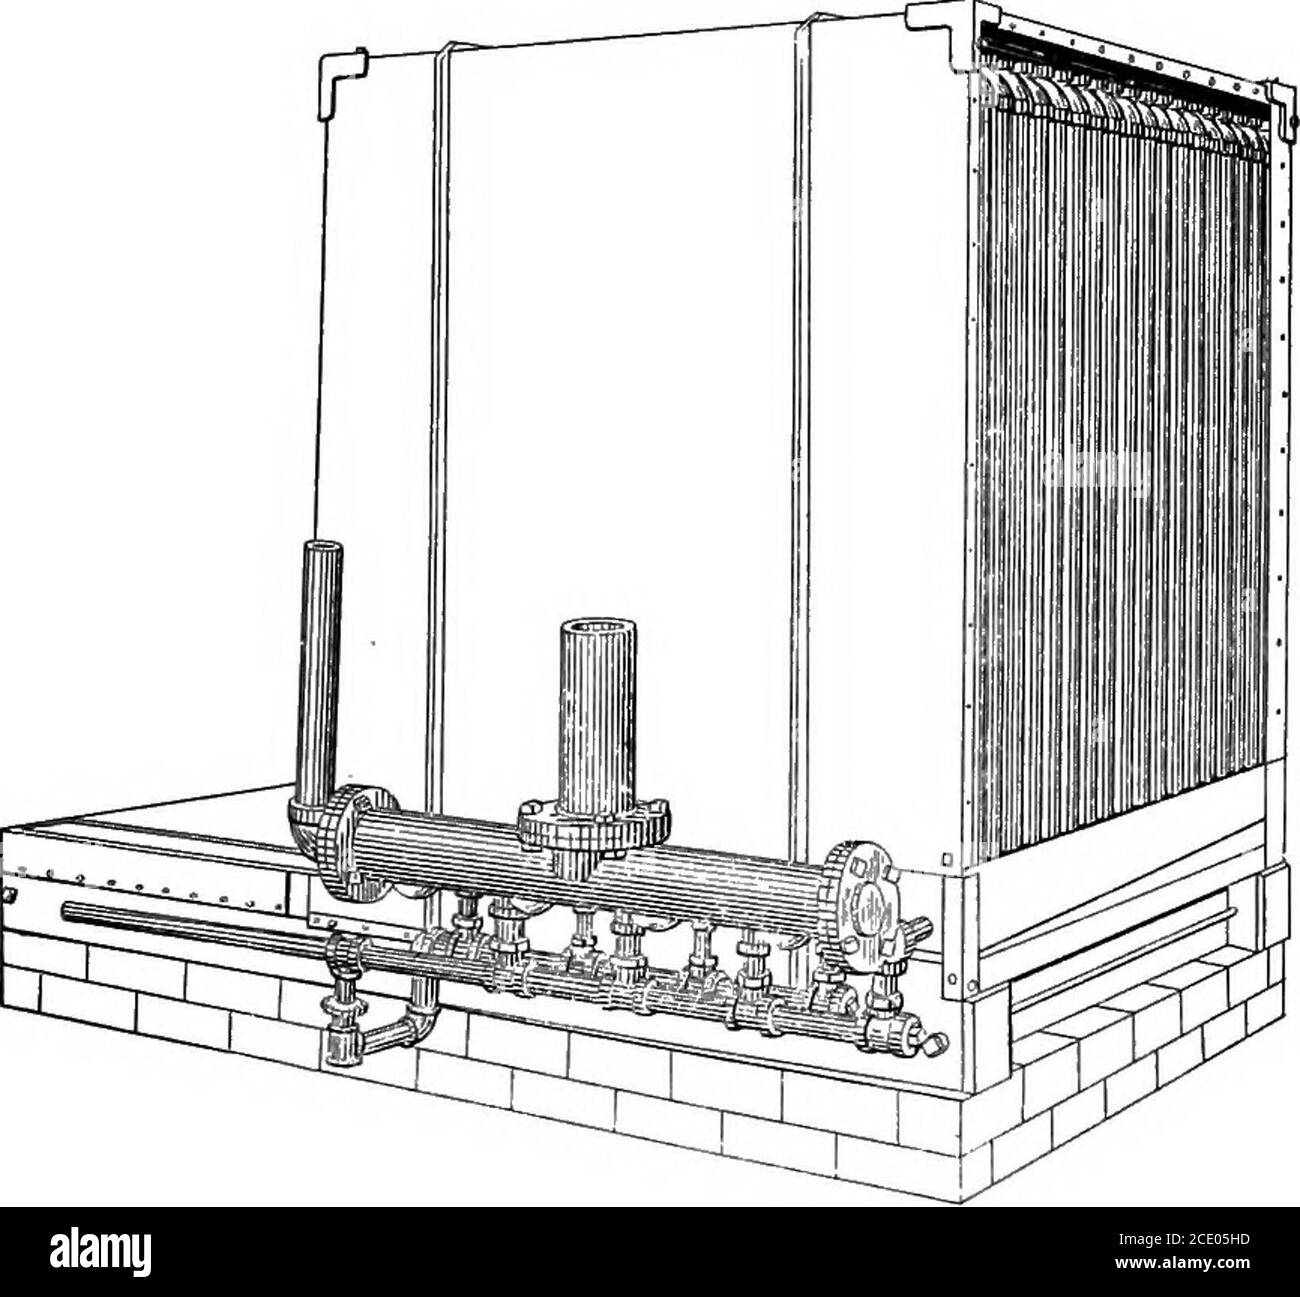 . Power, heating and ventilation ... a treatise for designing and constructing engineers, architects and students . A4 Fig. 150. Sectional Heater of American Blower Company. Heating Surface of Pipe Heaters.—The square feet of heatingsurface in a single row is obtained by multiplying the number ofpipes by the height in feet, and dividing by 3. This resultmultiplied by the number of rows will give the total heating sur-face in the heater. In the above, no account has been taken of thesurface in the base and pipe fittings; this amounts to approxi-mately 1 square foot for each foot in width of the Stock Photo